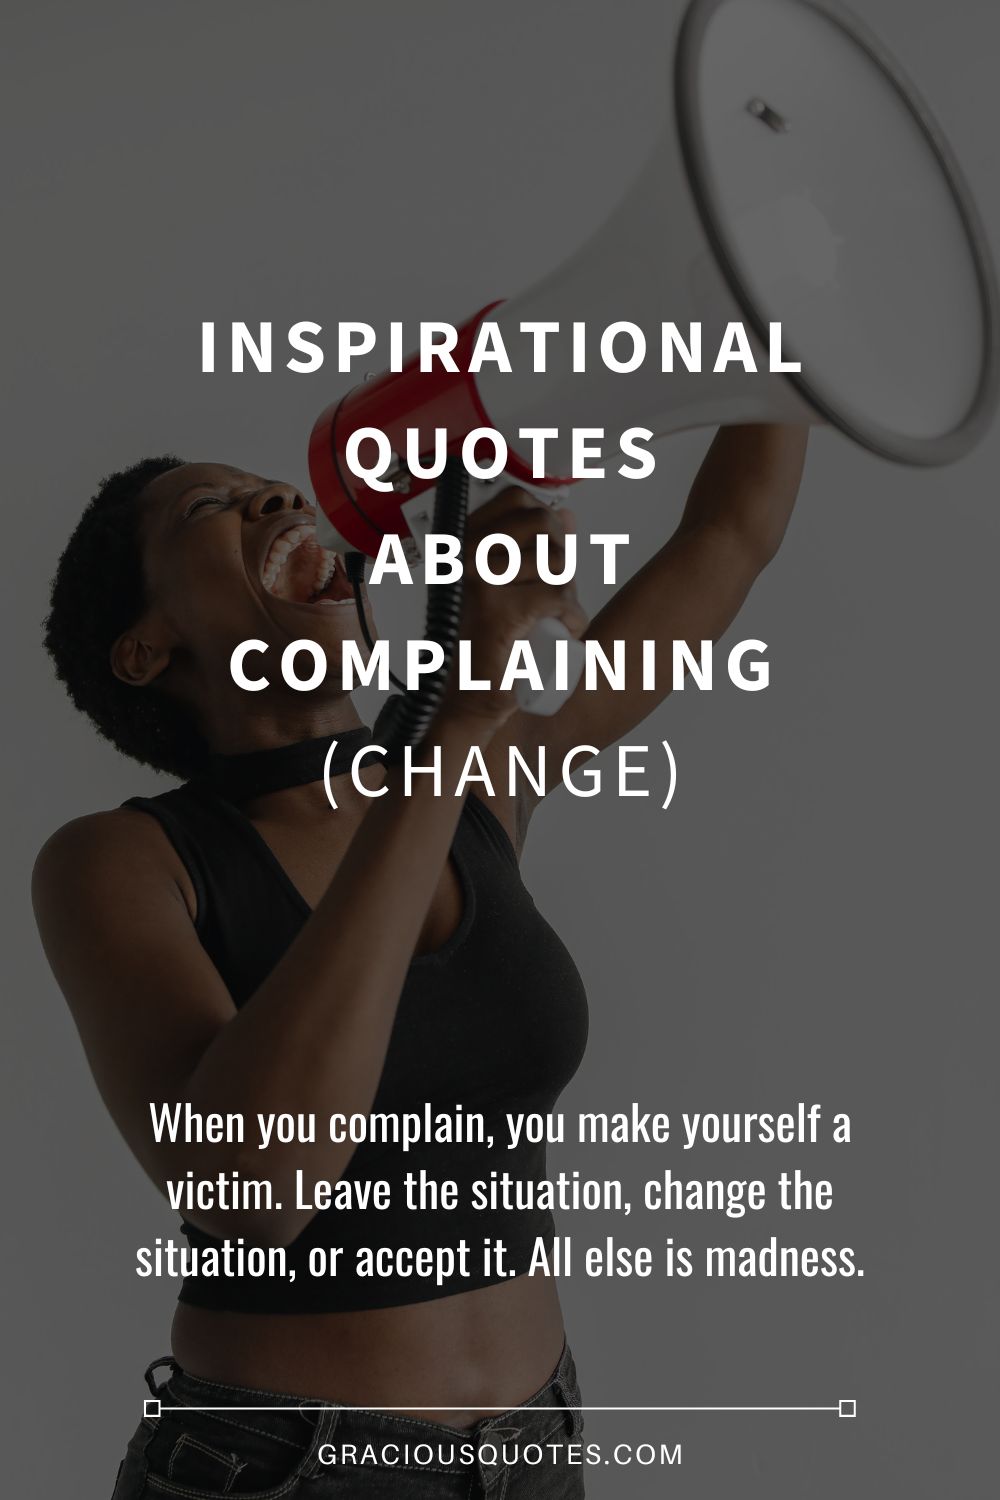 Inspirational Quotes About Complaining (CHANGE) - Gracious Quotes